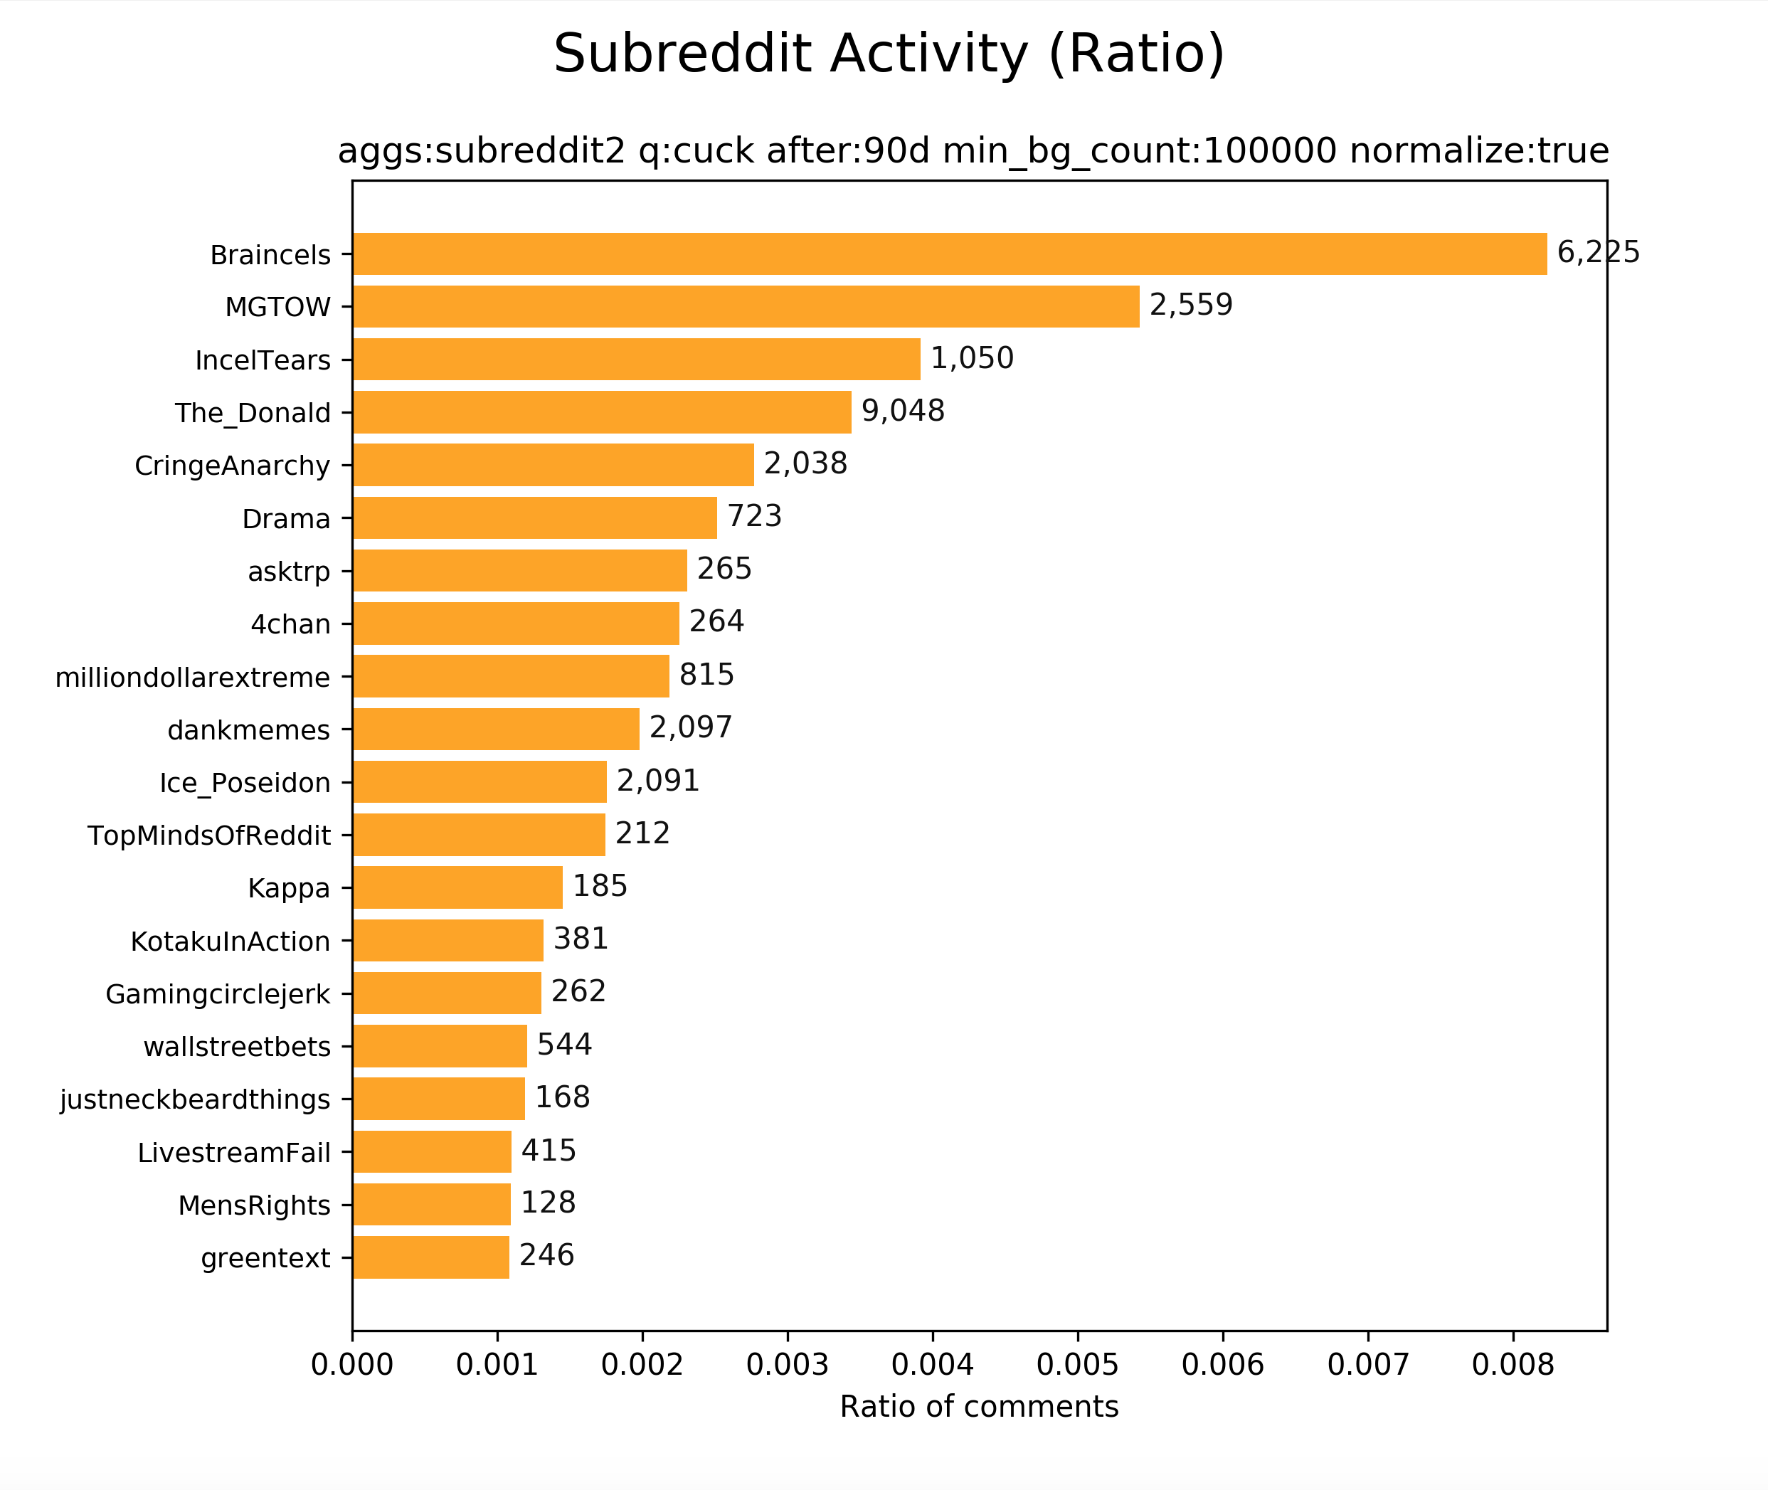 Subreddit frequency analysis of "cuck", normalised for subreddit size